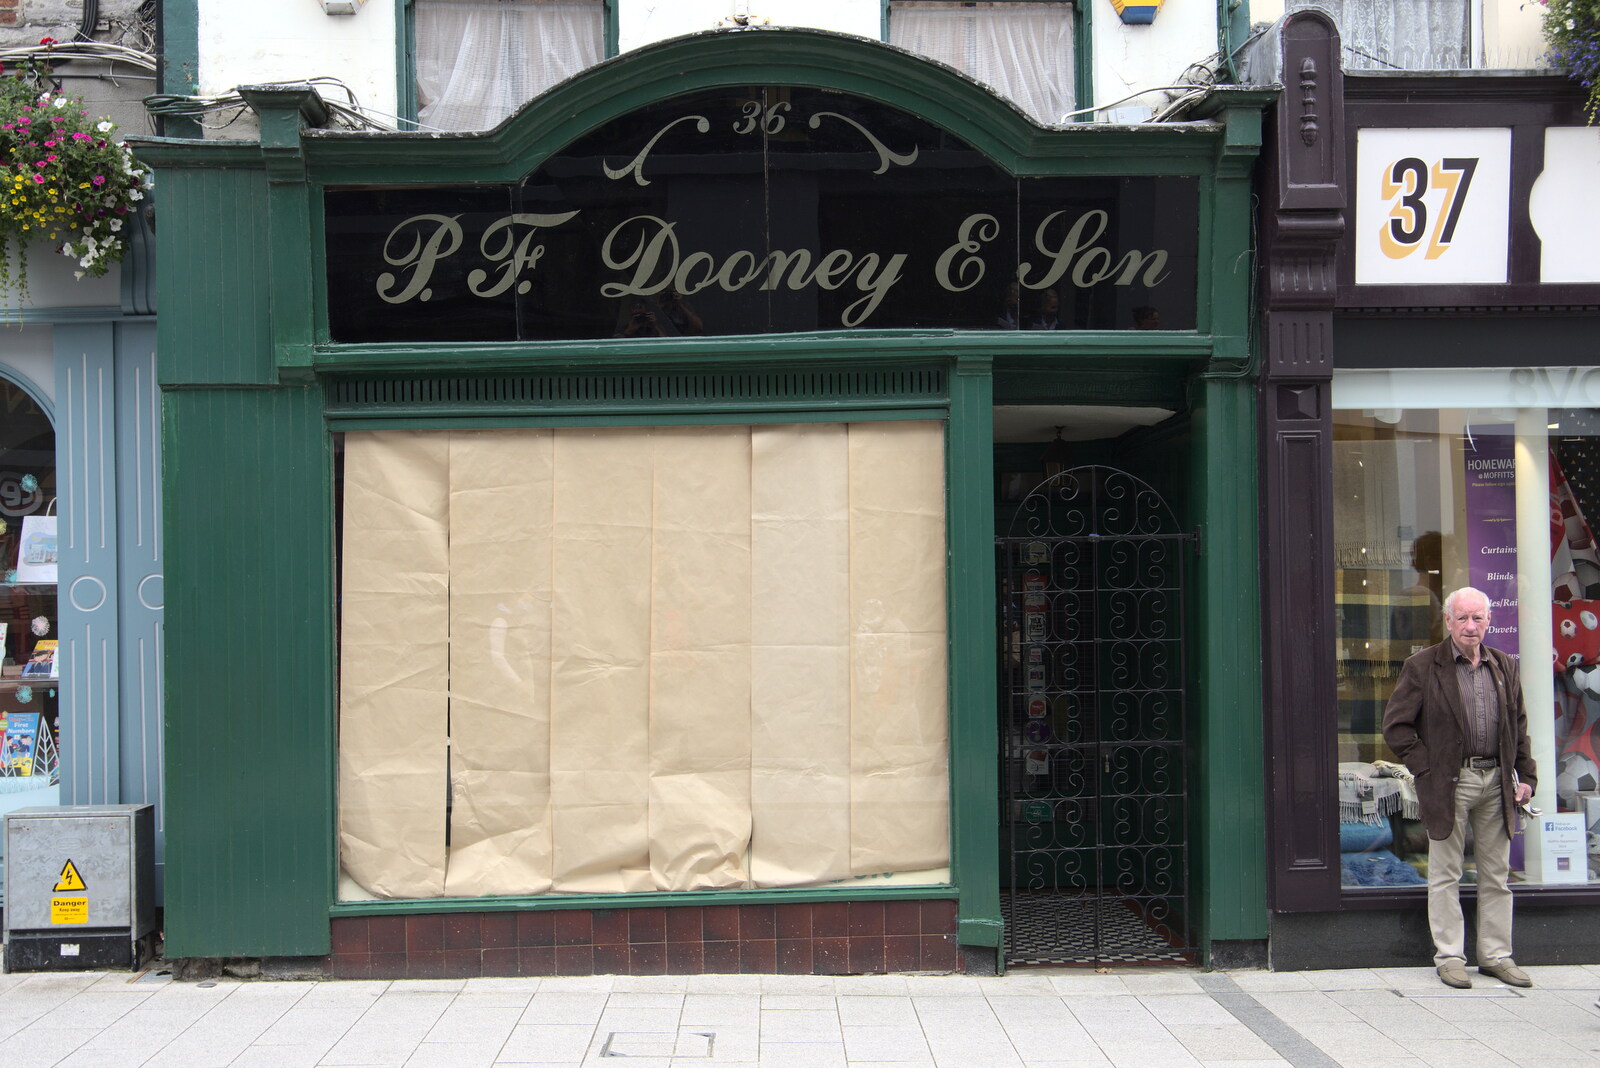 A Trip to Manorhamilton, County Leitrim, Ireland - 11th August 2021: The closed-down P F Dooney and Son